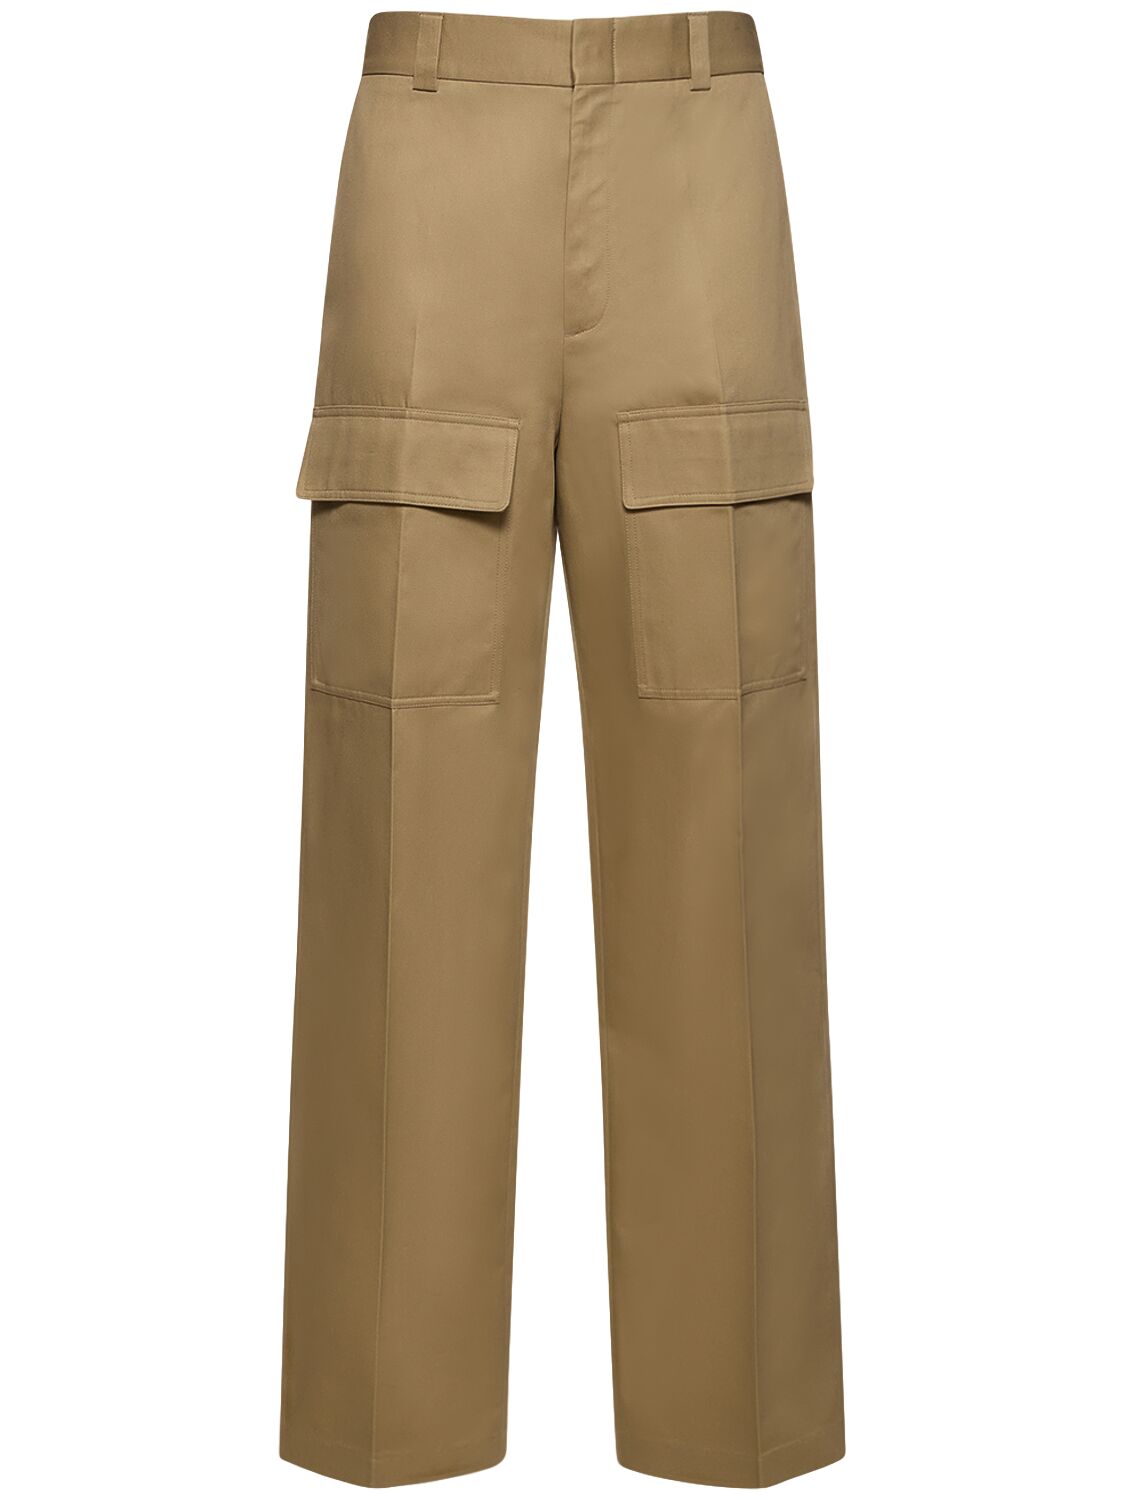 Gucci Military Cotton Drill Cargo Pants In Cereal